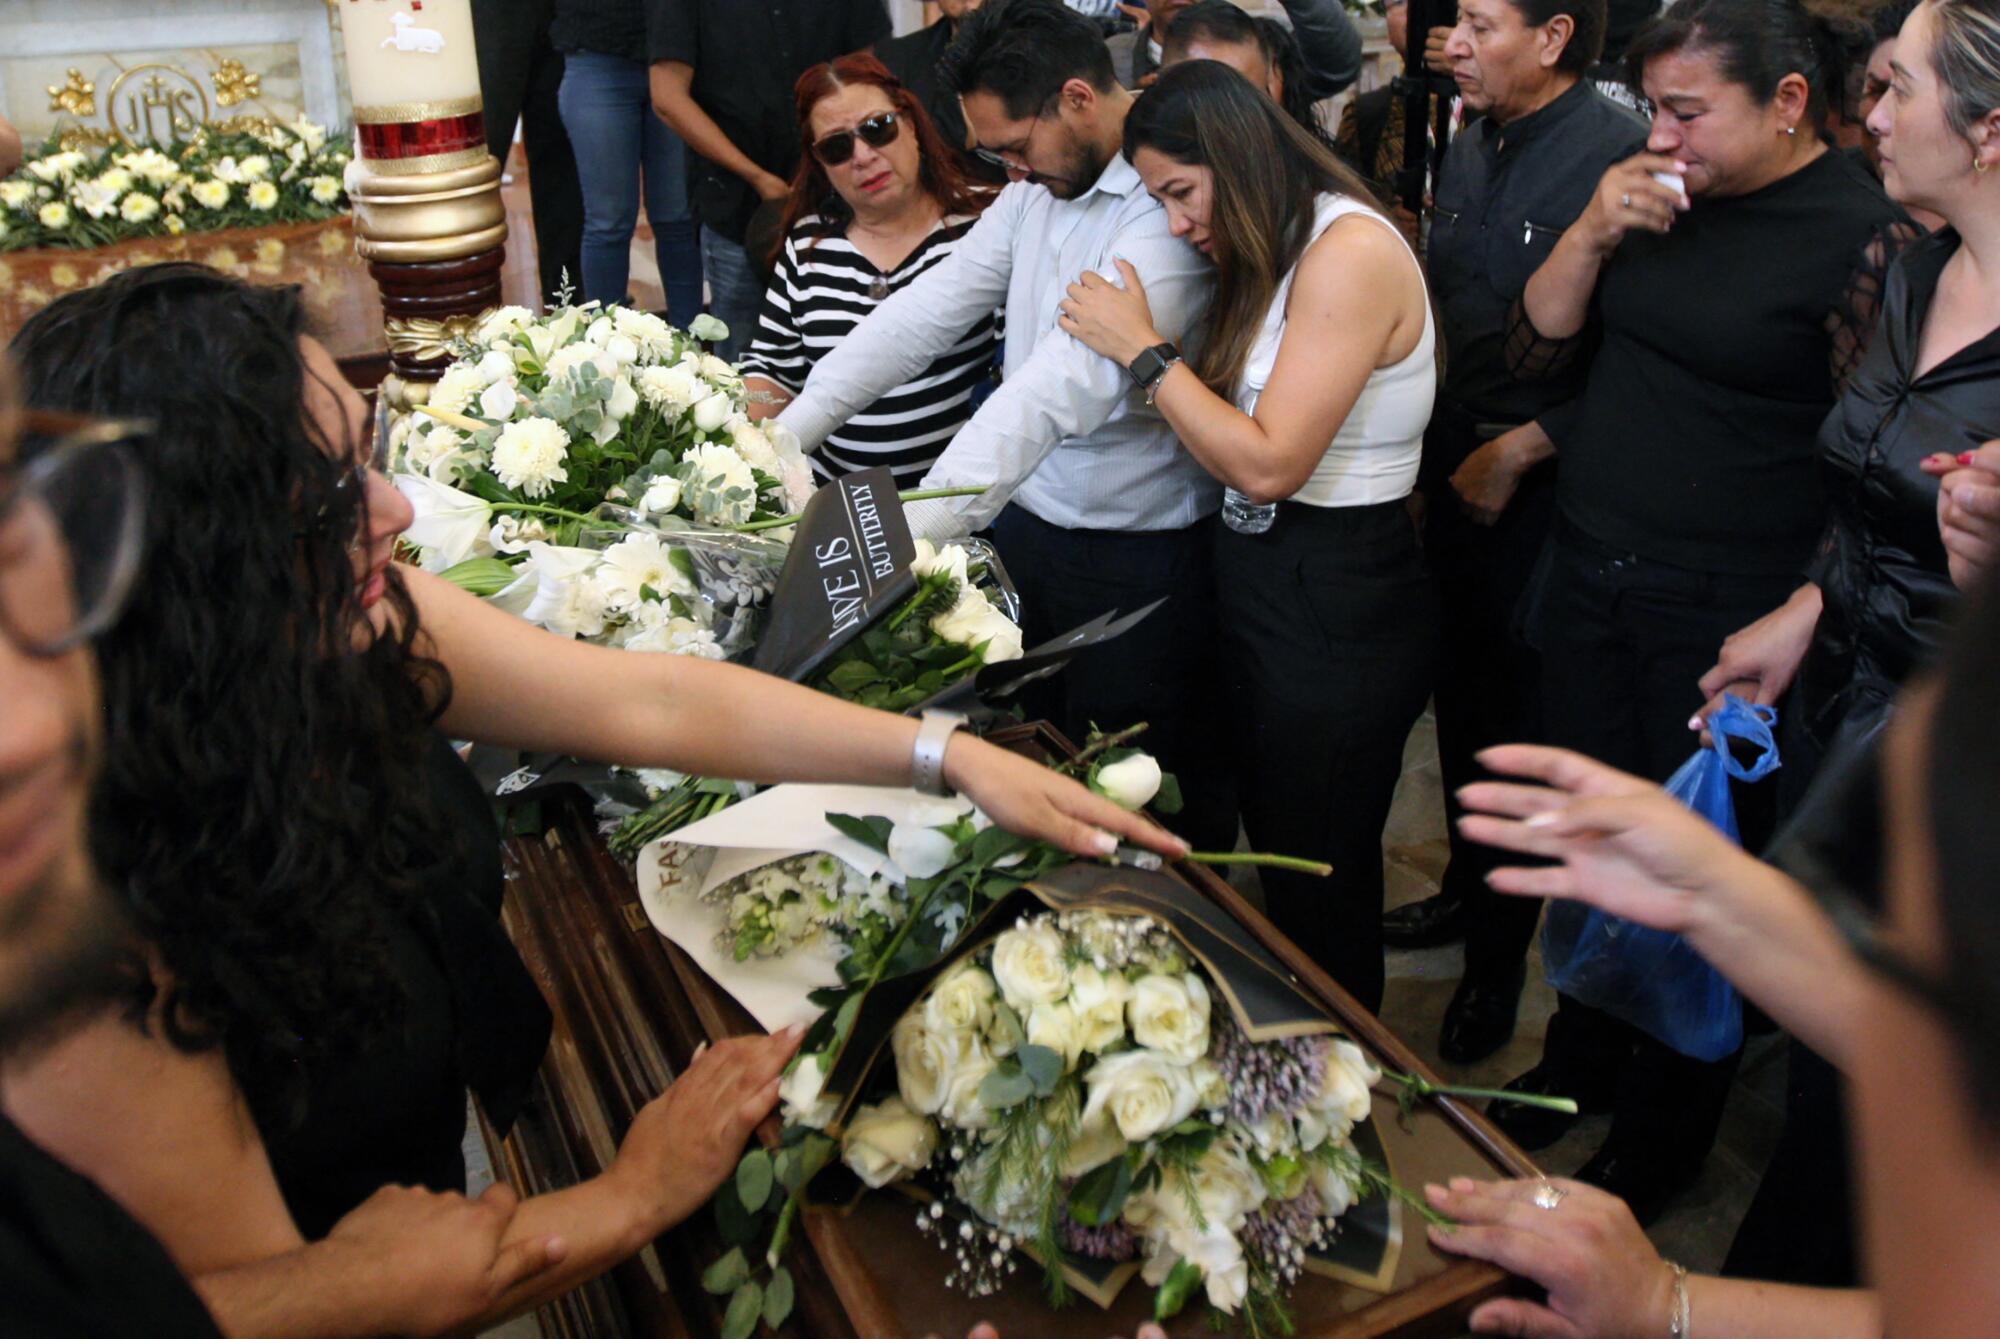 Relatives of Gisela Gaytán mourn during her funeral in Celaya, Guanajuato State, Mexico, 